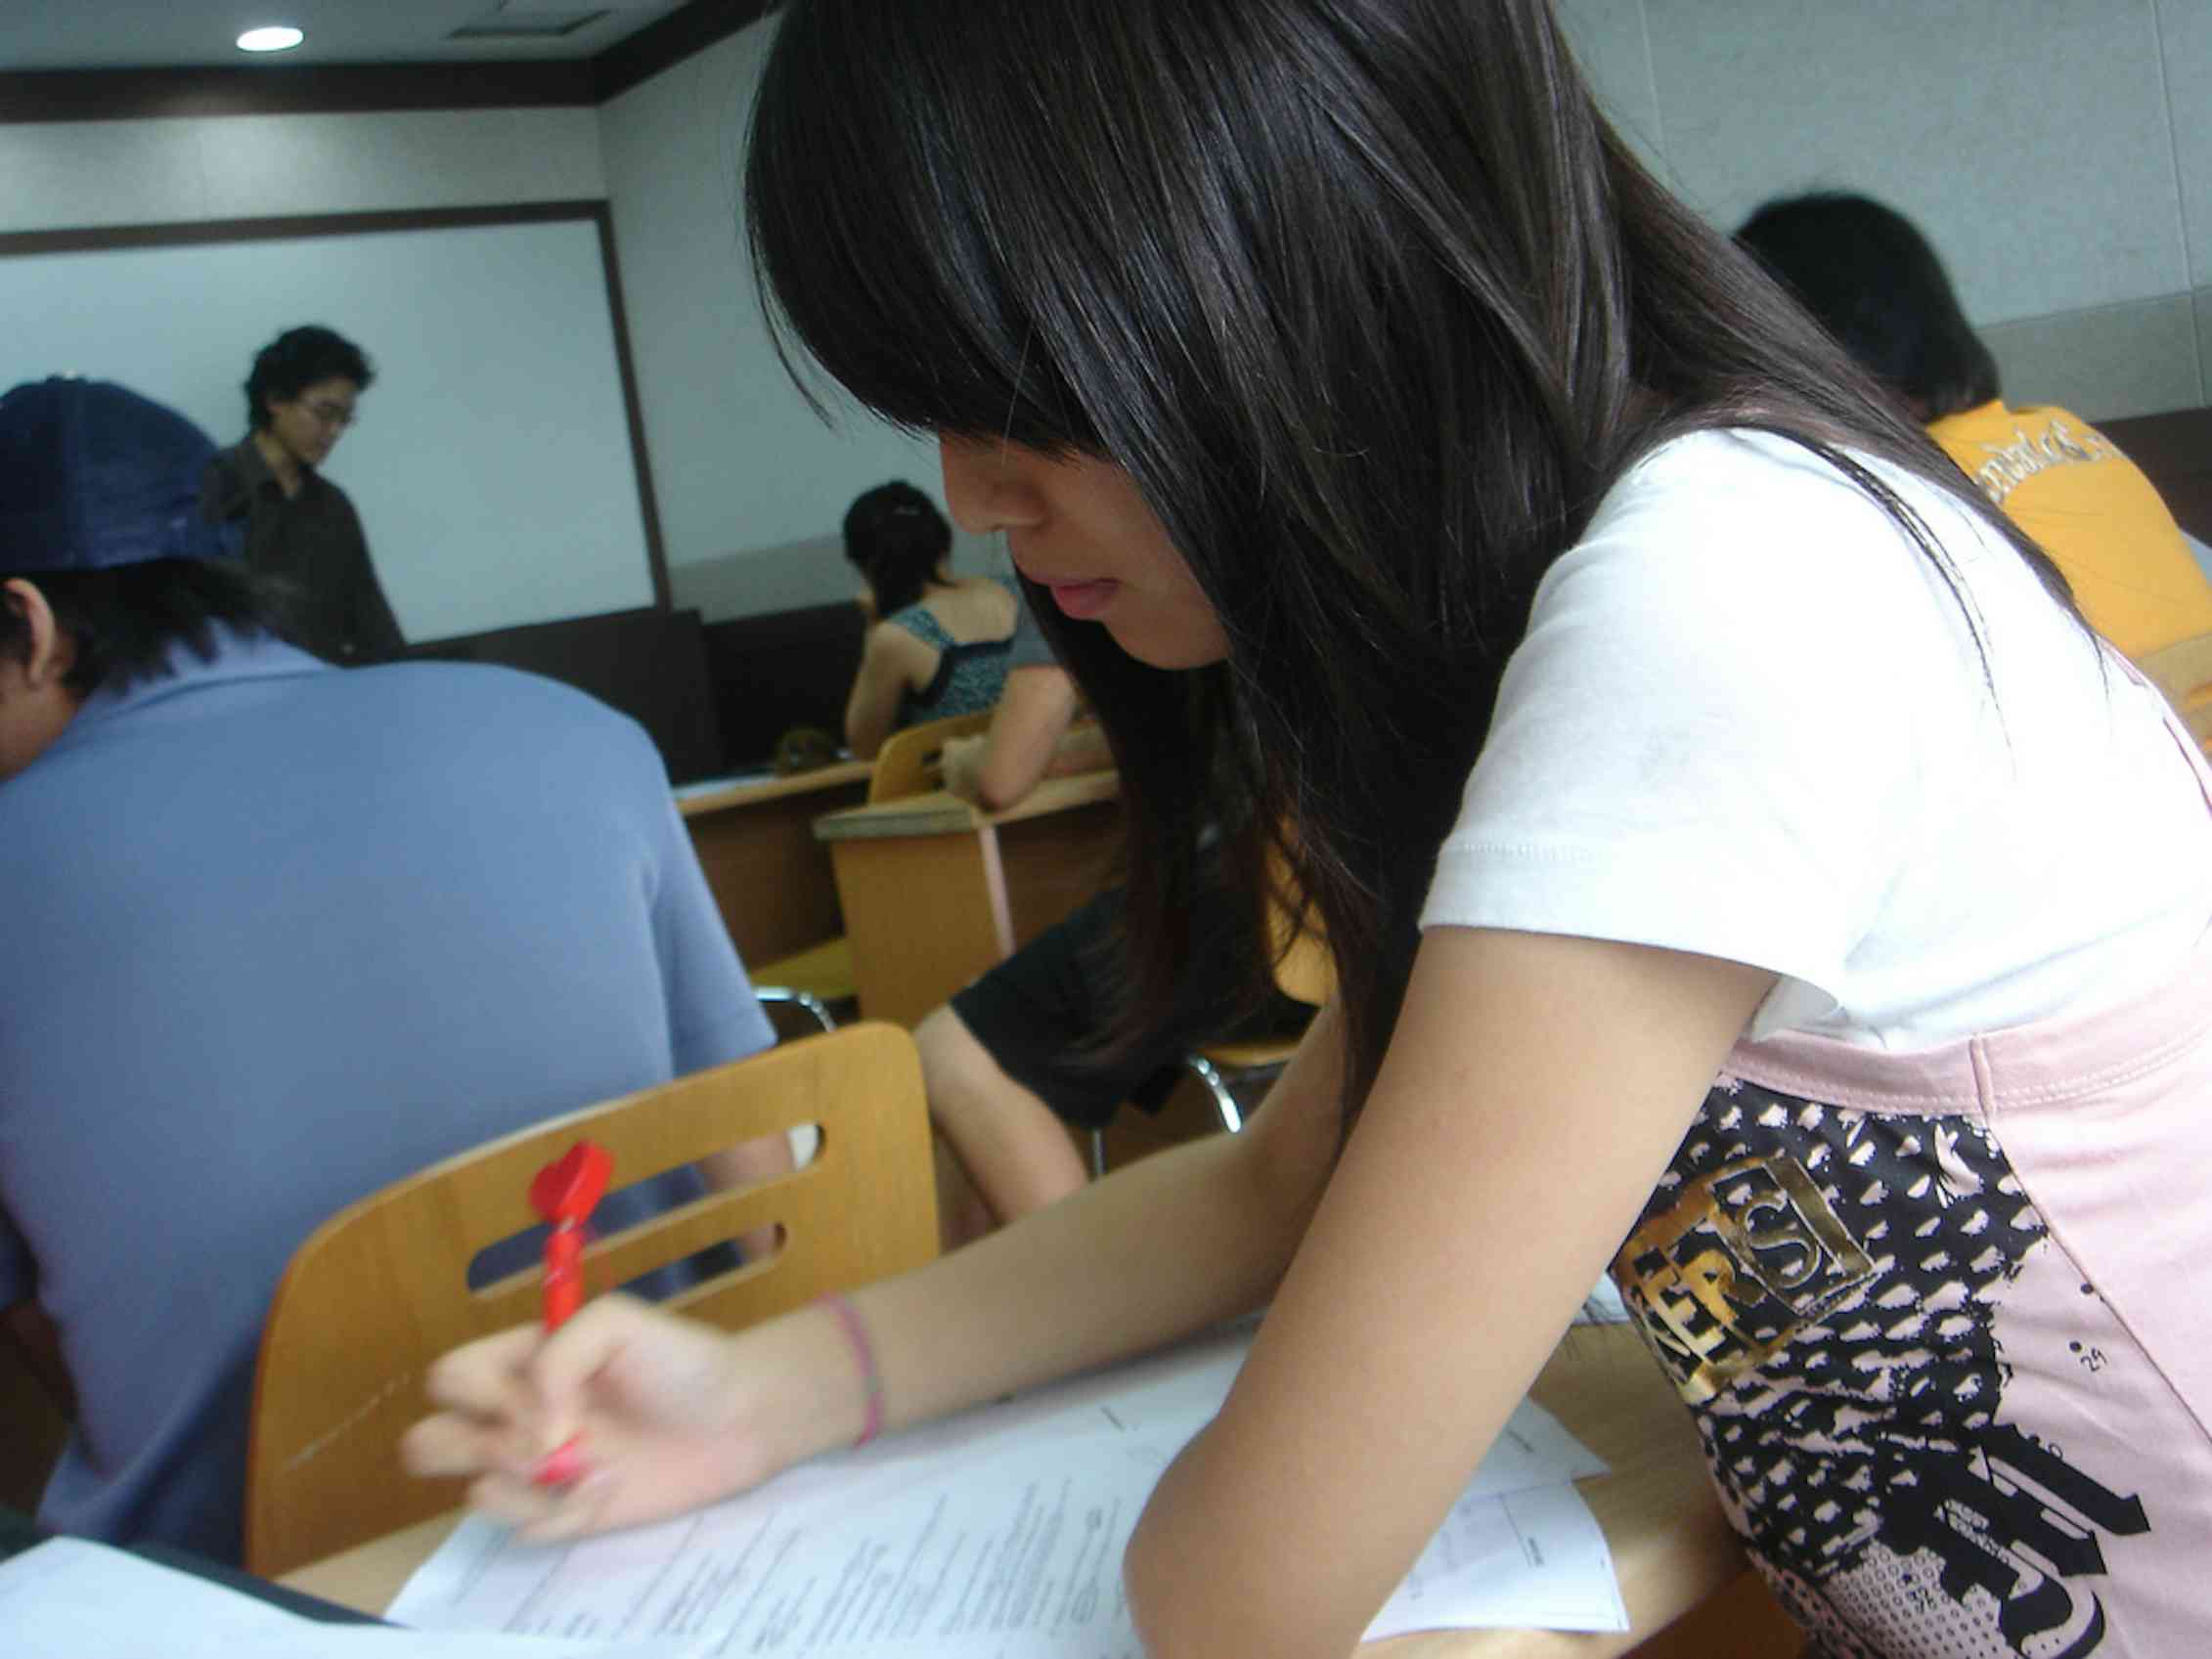 Asian America Needs Affirmative Action In Higher Education